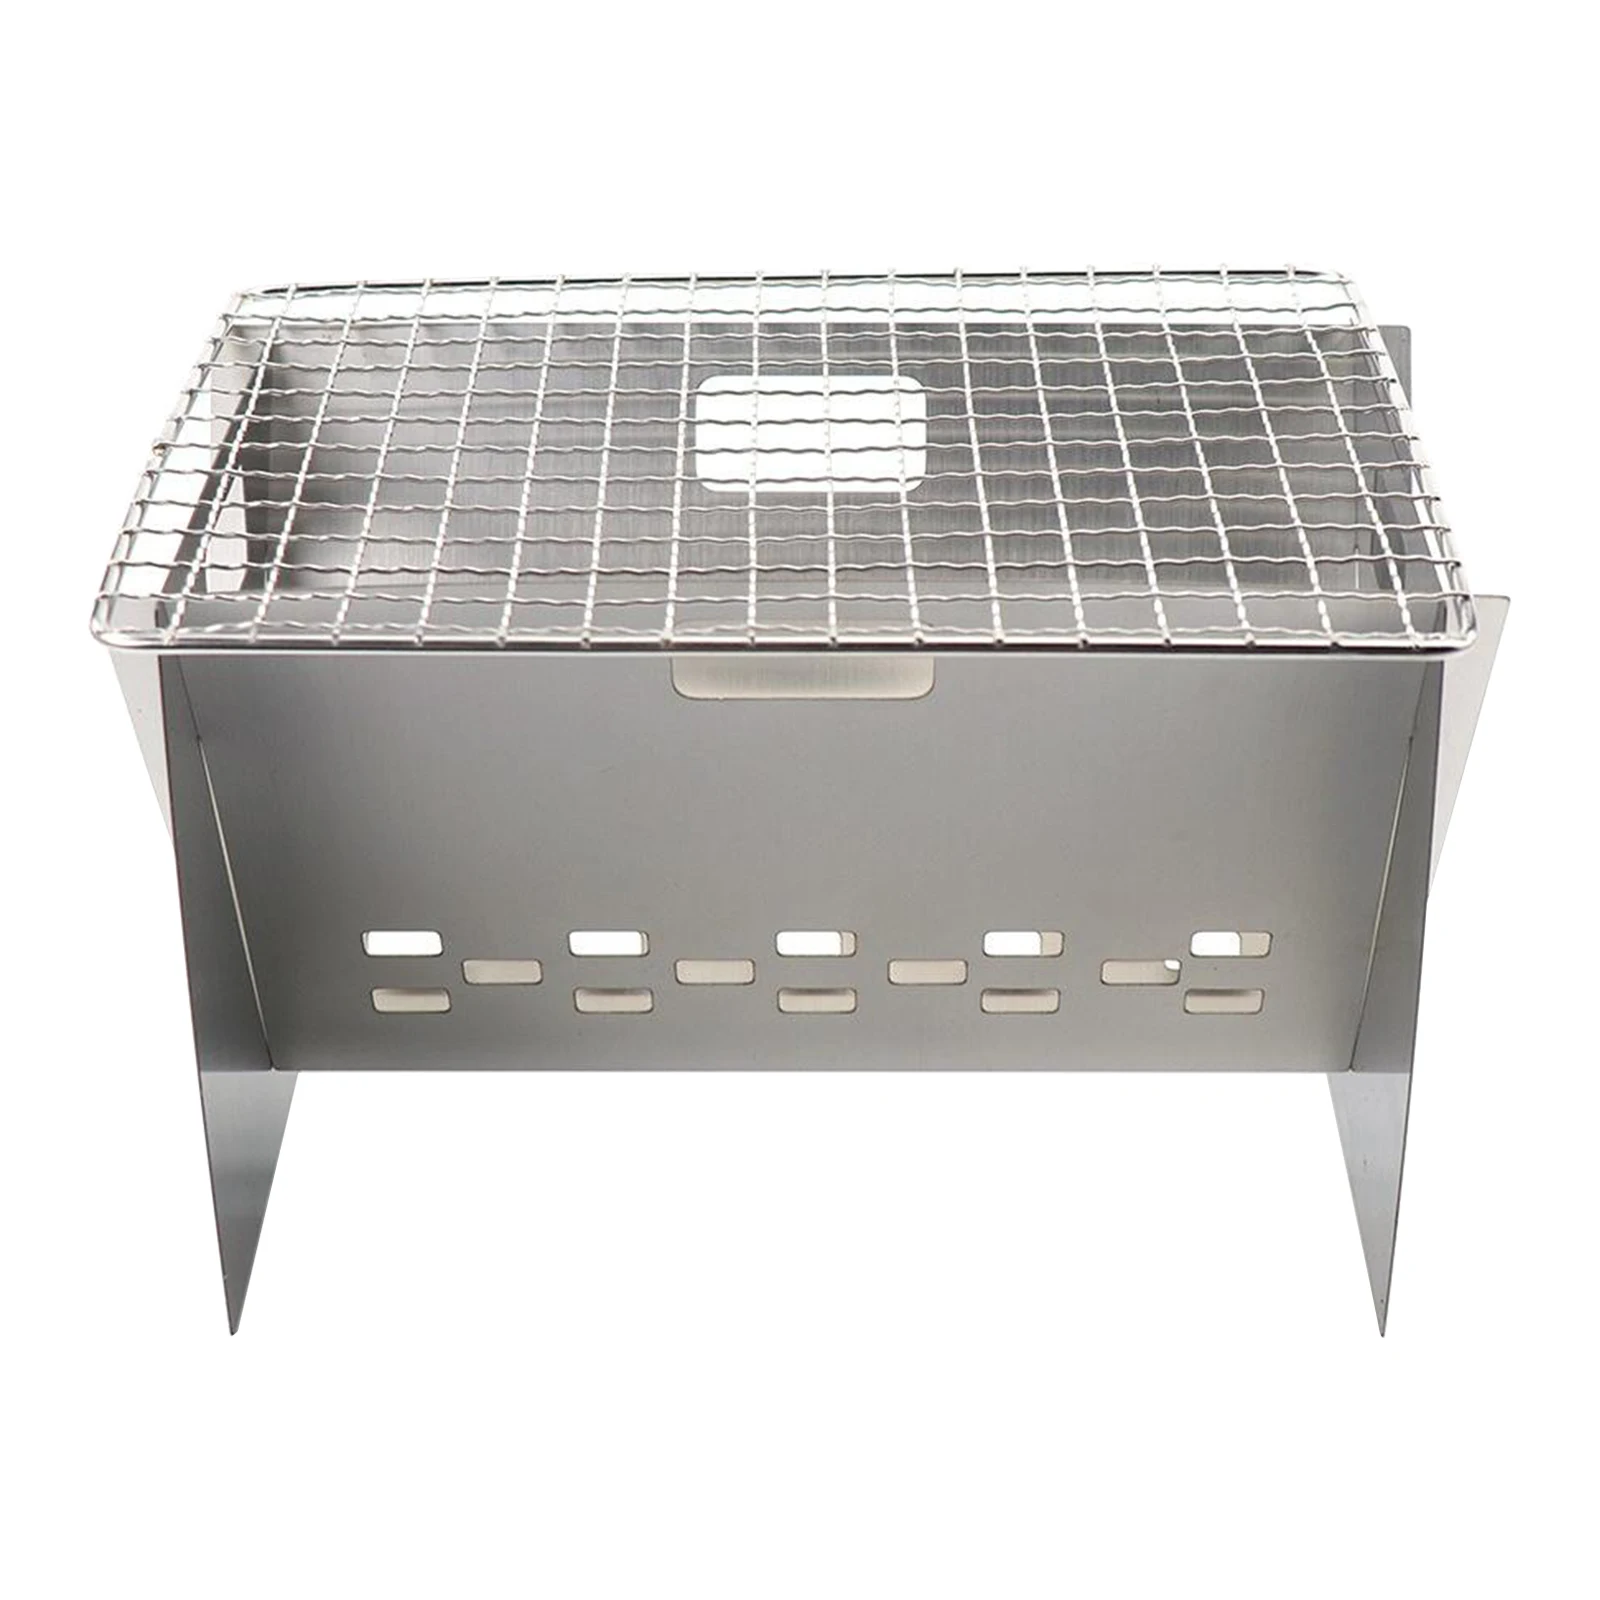 Foldable Folding BBQ Barbecue Portable Camping Outdoor Garden Grill